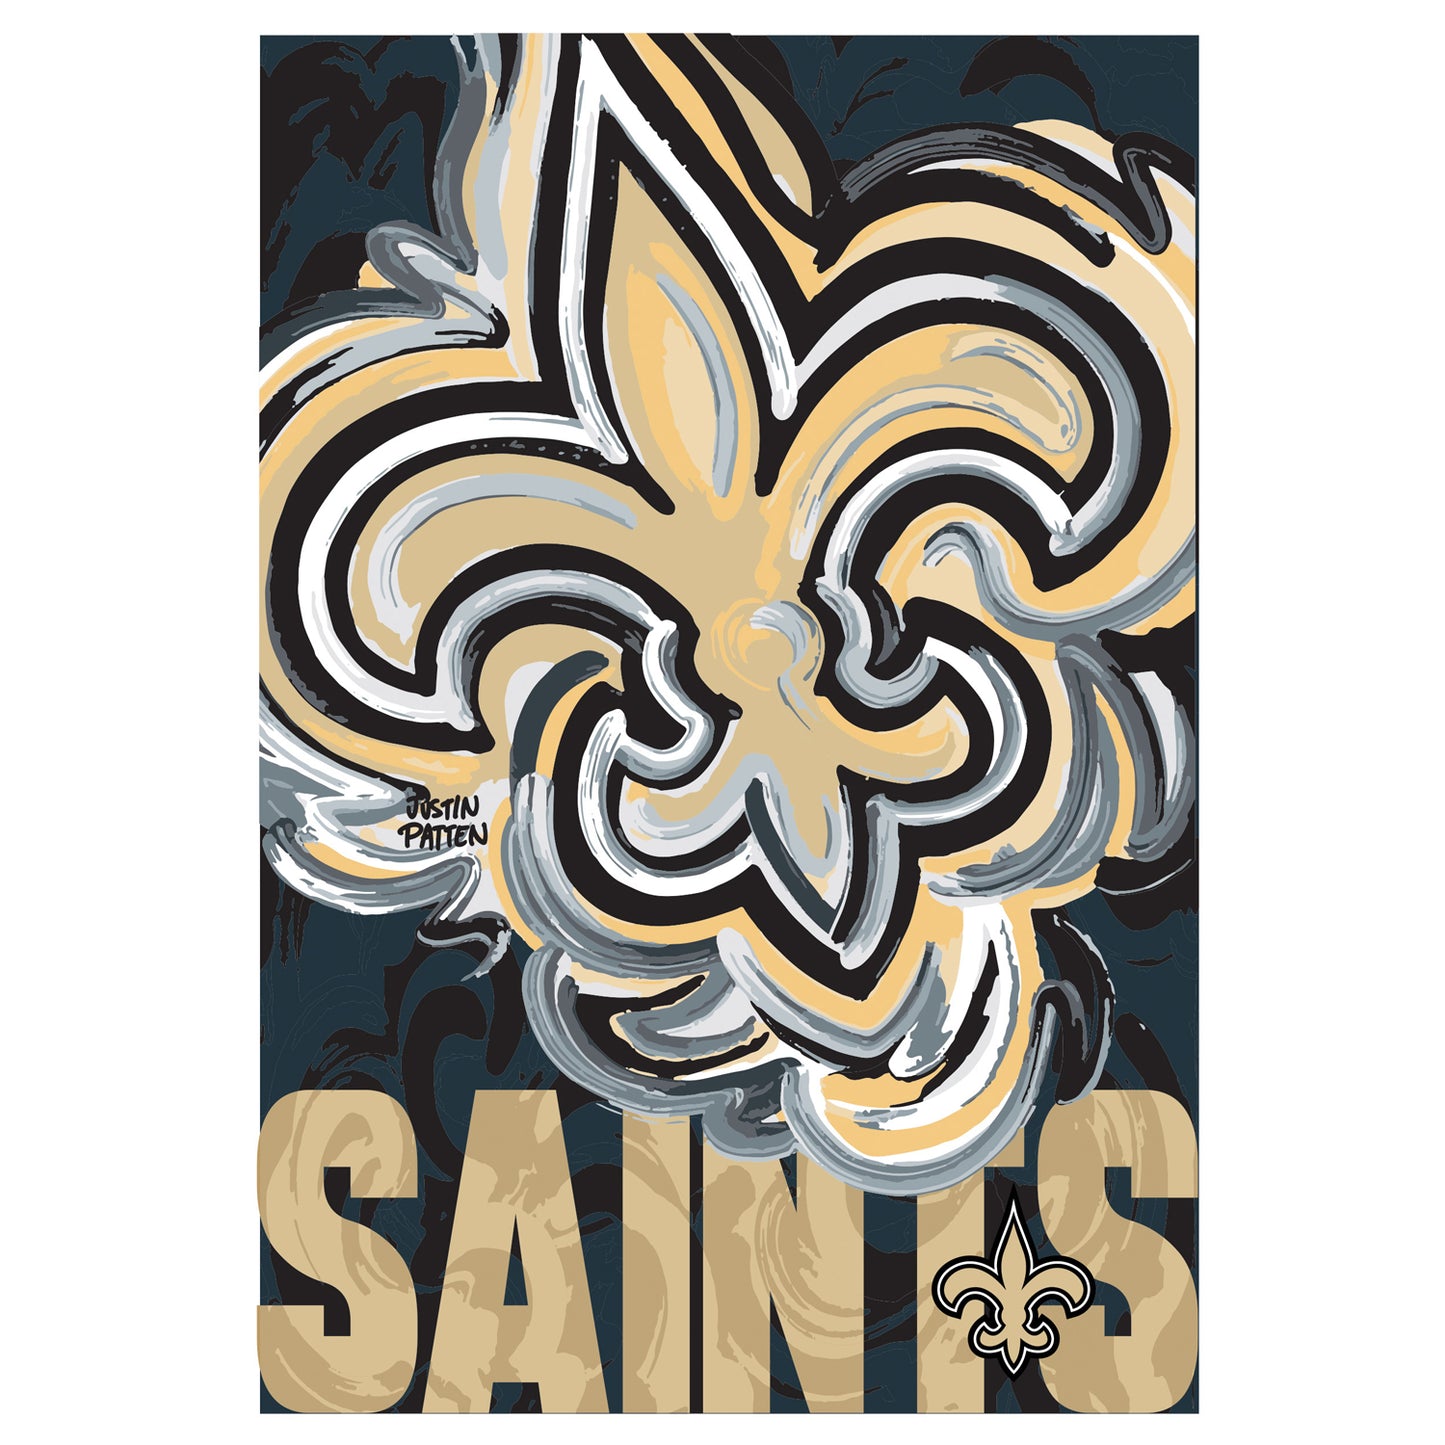 New Orleans Saints House Flag 29" x 43" by Justin Patten